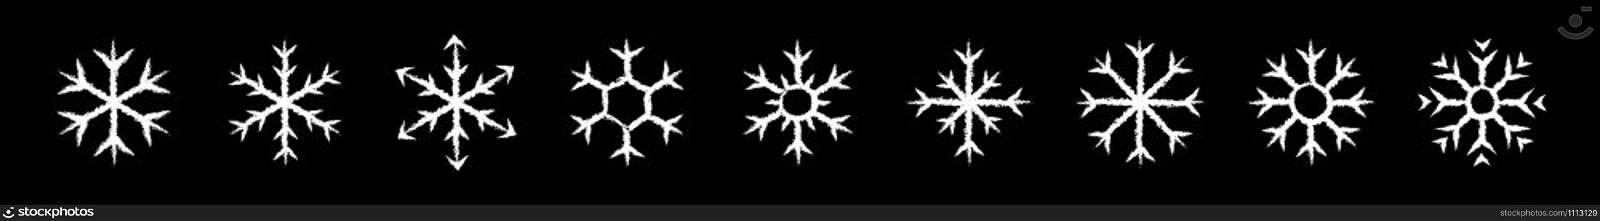 Set of icy snowflakes symbol vector illustration. White chalk sketch frozen snowflake isolated on blackboard for new year celebration snow decoration ornament or christmas festive frost flakes design. Set of icy snowflakes chalked sketch symbol